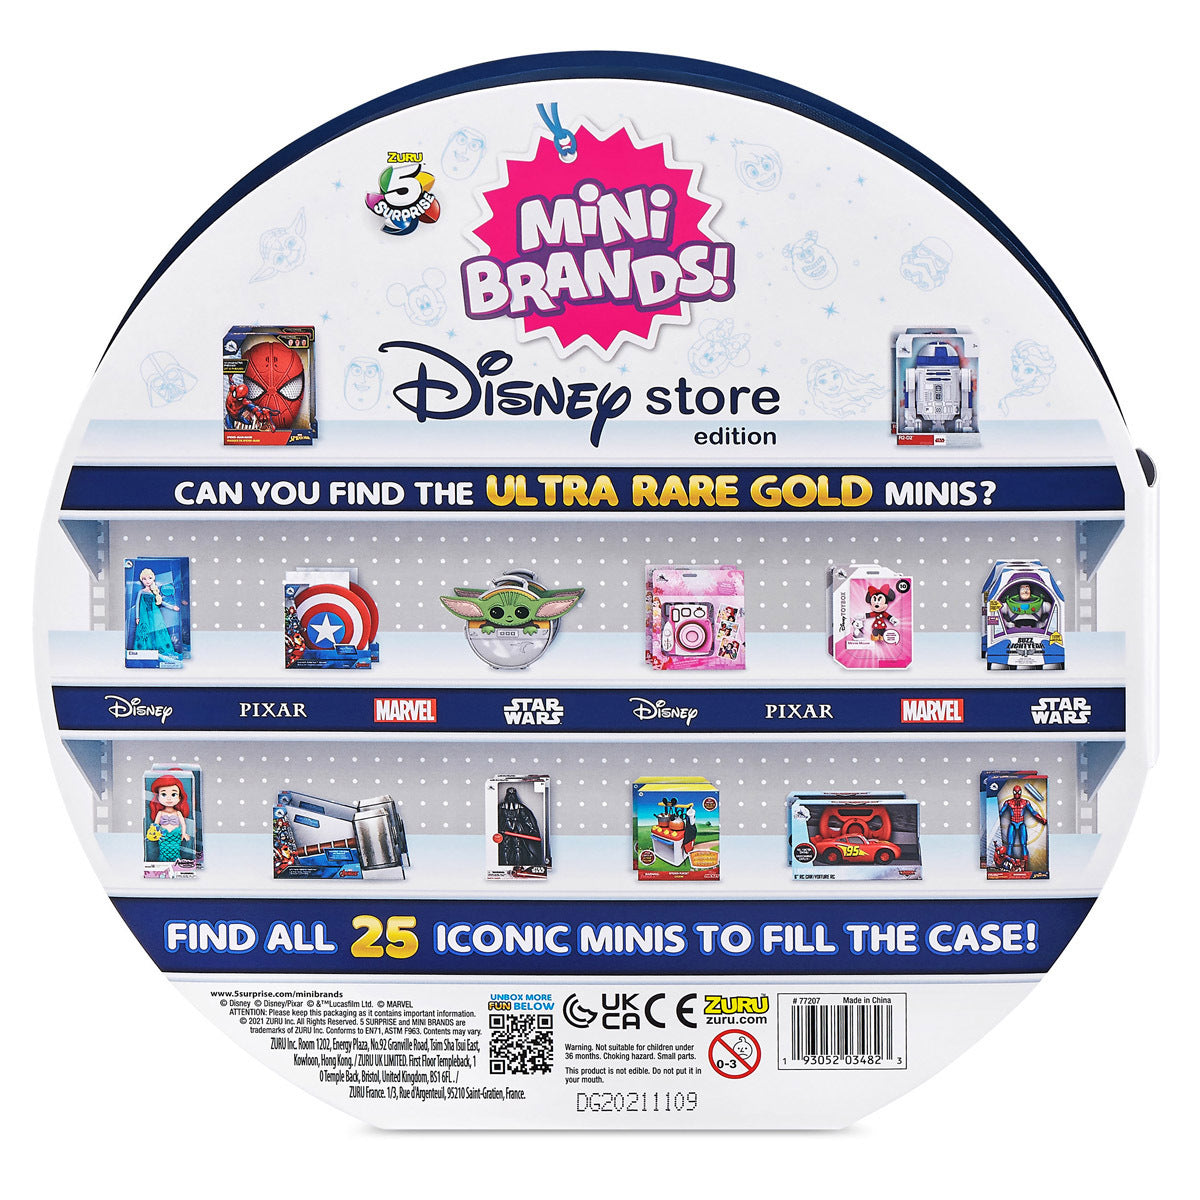 5 Surprise Mini Disney Brands Series 1 Collector's Case with 5 Minis by ZURU (Styles Vary)